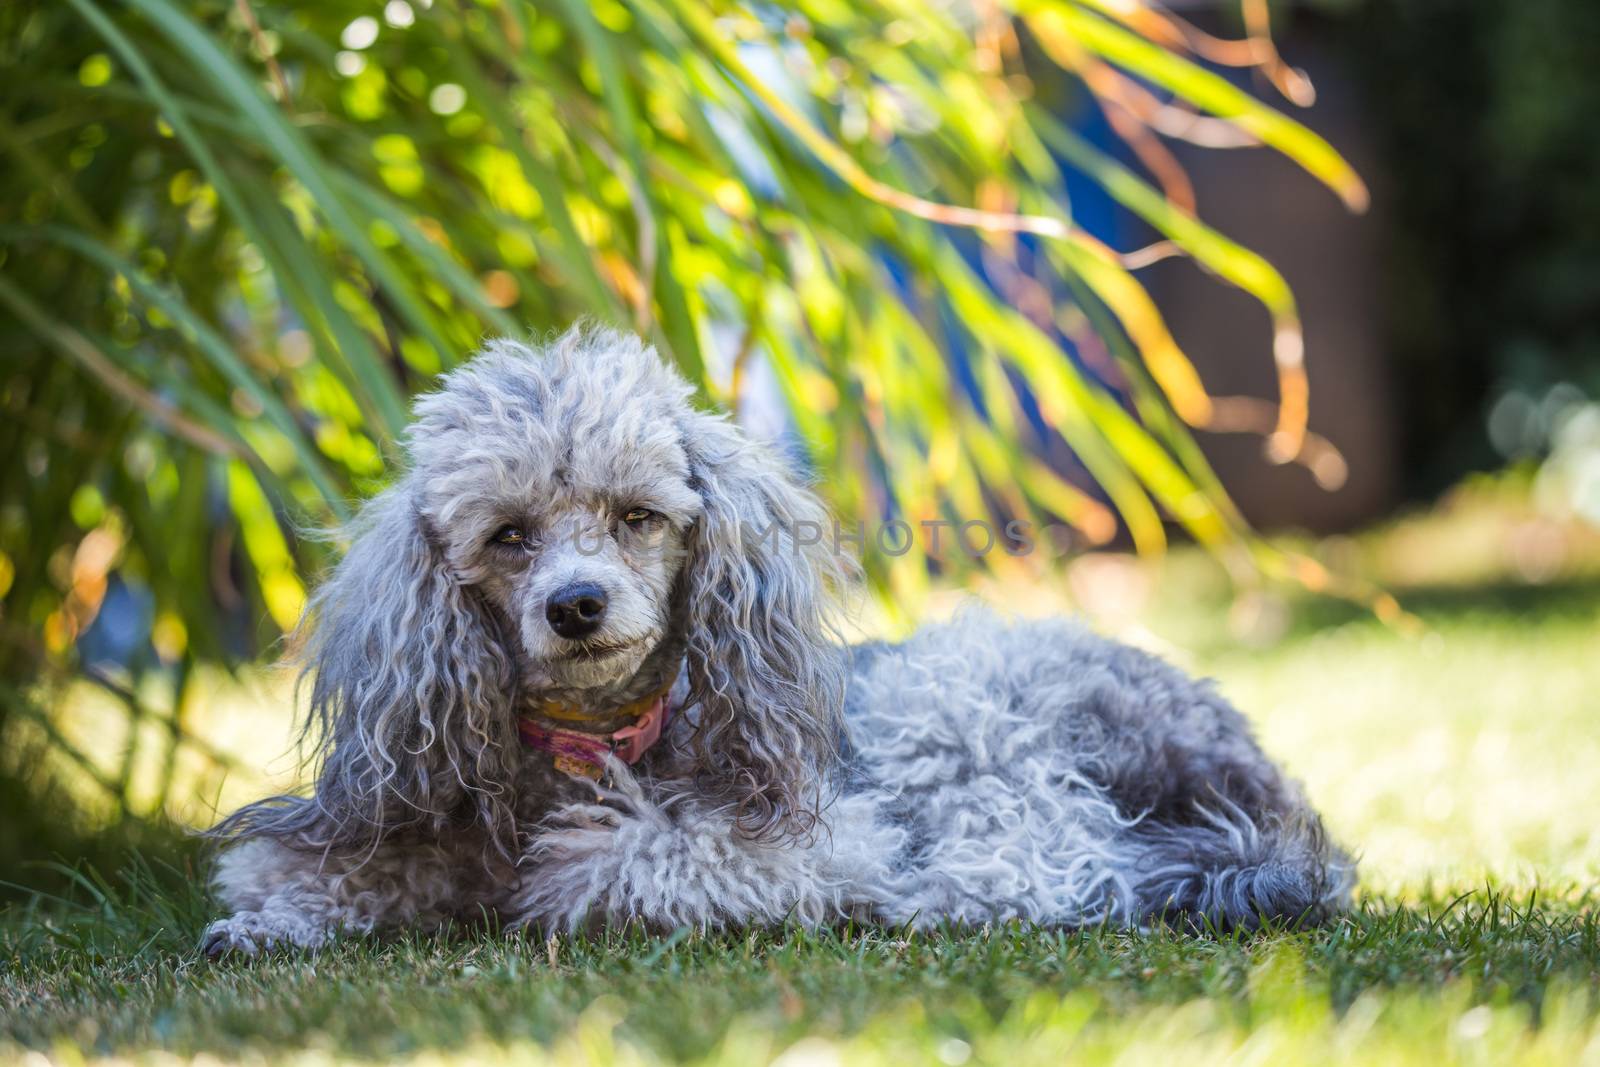 A miniature gray poodle toy lying on a green lawn on a sunny summer day. by petrsvoboda91